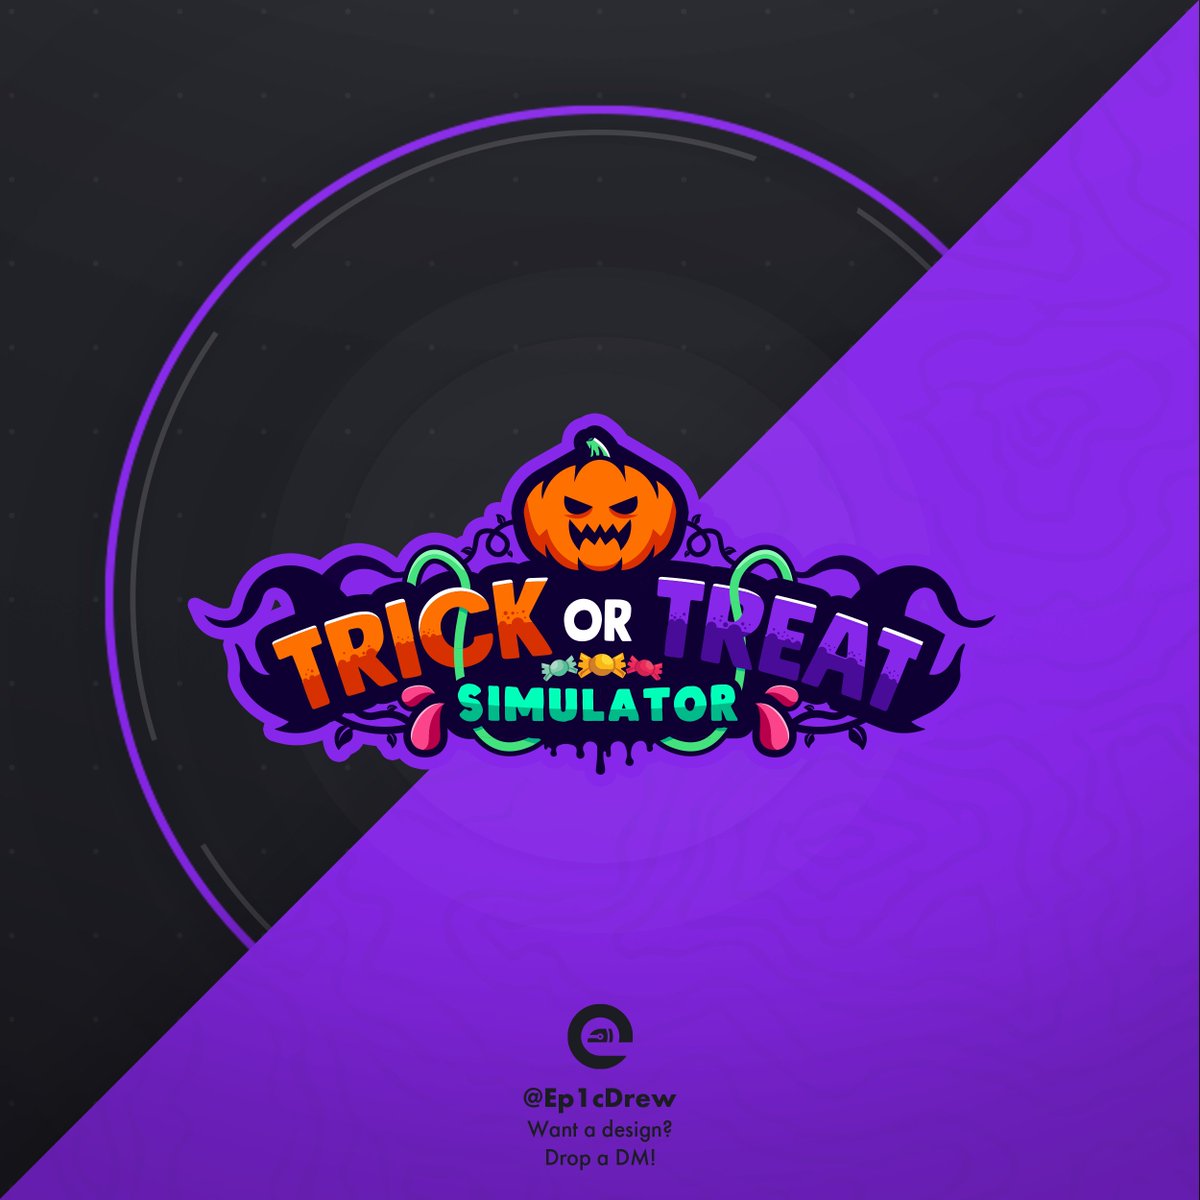 Ep1cdrew On Twitter Spooky Commission Logo For The Game Trick Or Treat Simulator Had A Lot Of Fun Making This S Rt S Appreciated Robloxdev Roblox Known Members Devs Ghettomilkman Passhley - 3 new codes trick or treat simulator roblox